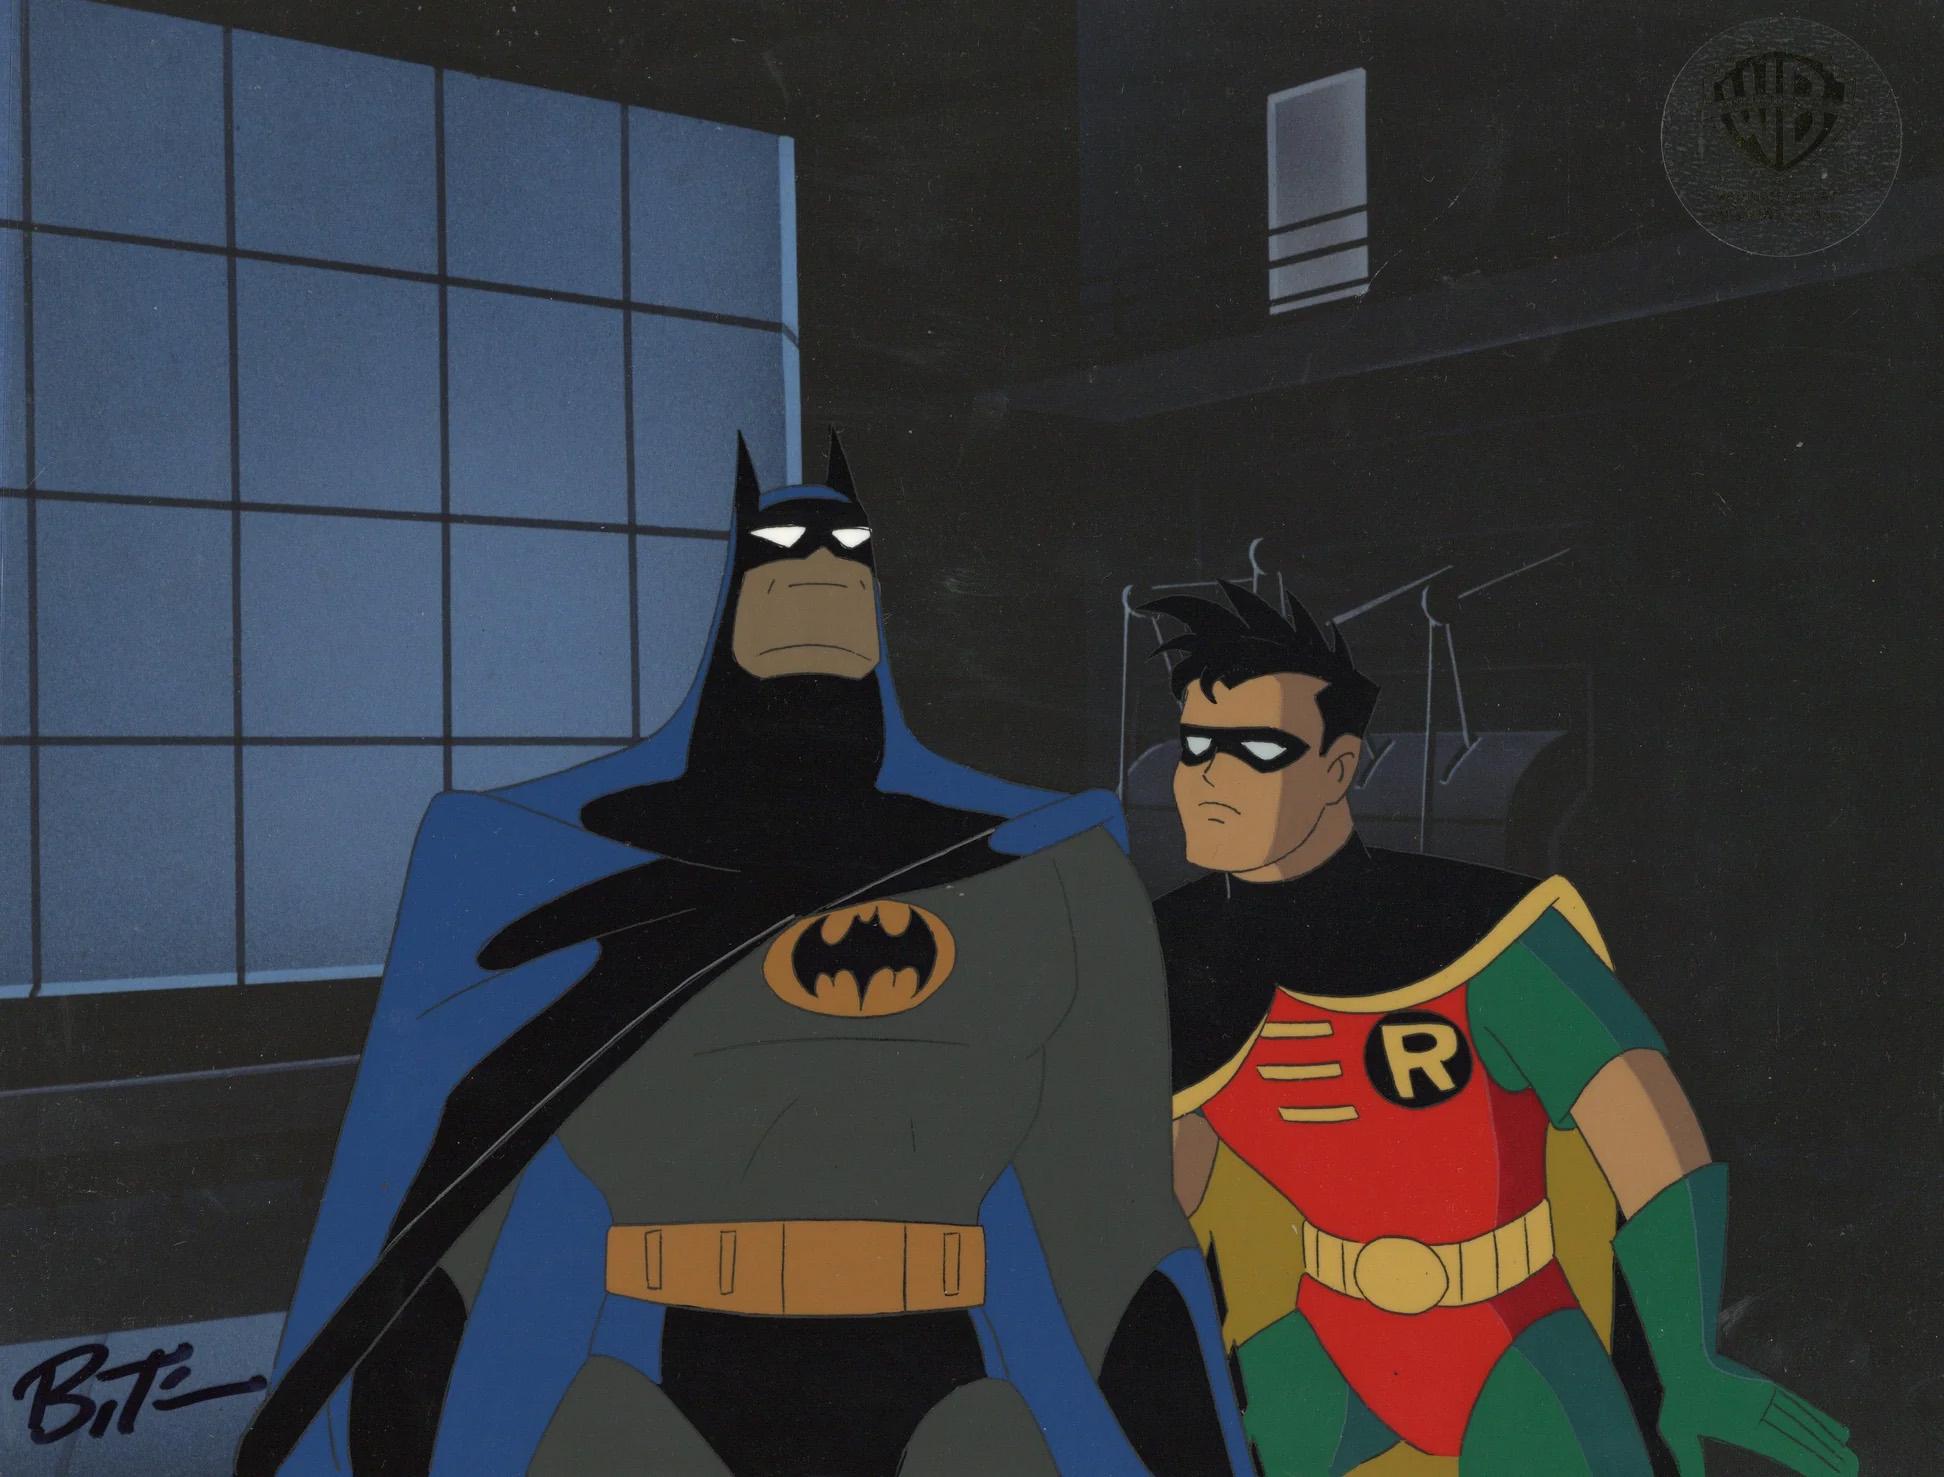 Batman The Animated Series Production Cel signed by Bruce Timm: Batman, Robin  - Art by DC Comics Studio Artists